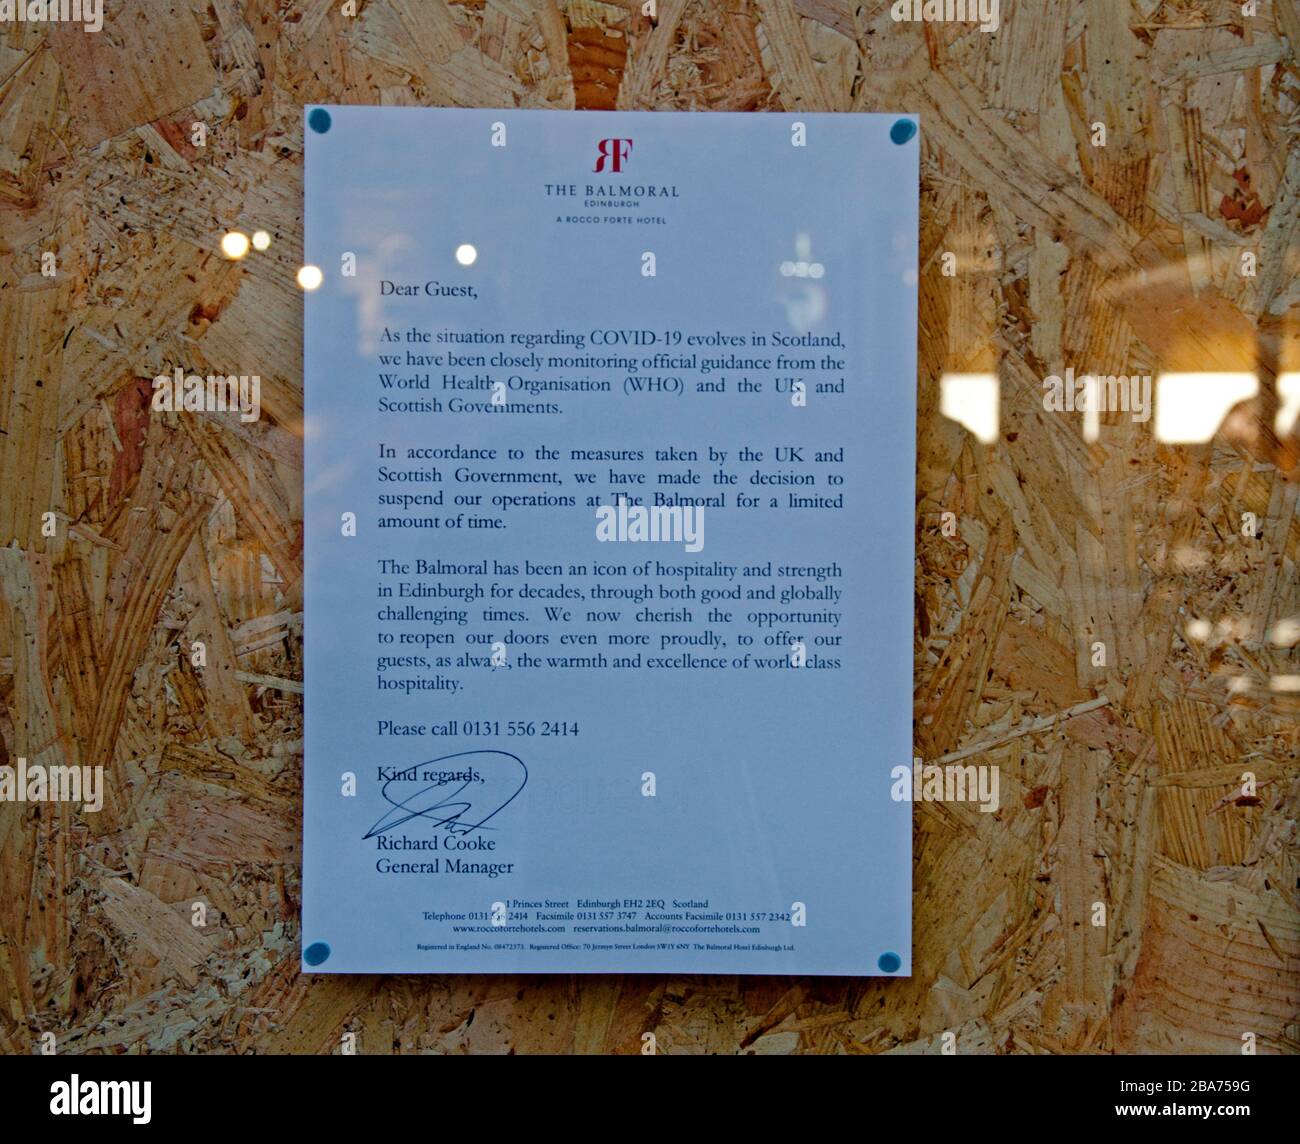 Princes Street, Edinburgh, Scotland, UK. 26th Mar 2020. On this third day of Lockdown in the UK, Princes Street awakes to discover that the Balmoral Hotel has boarded up the windows and closed, it has suspended business for a limited time. Pictured: notice in a boarded up window. Stock Photo